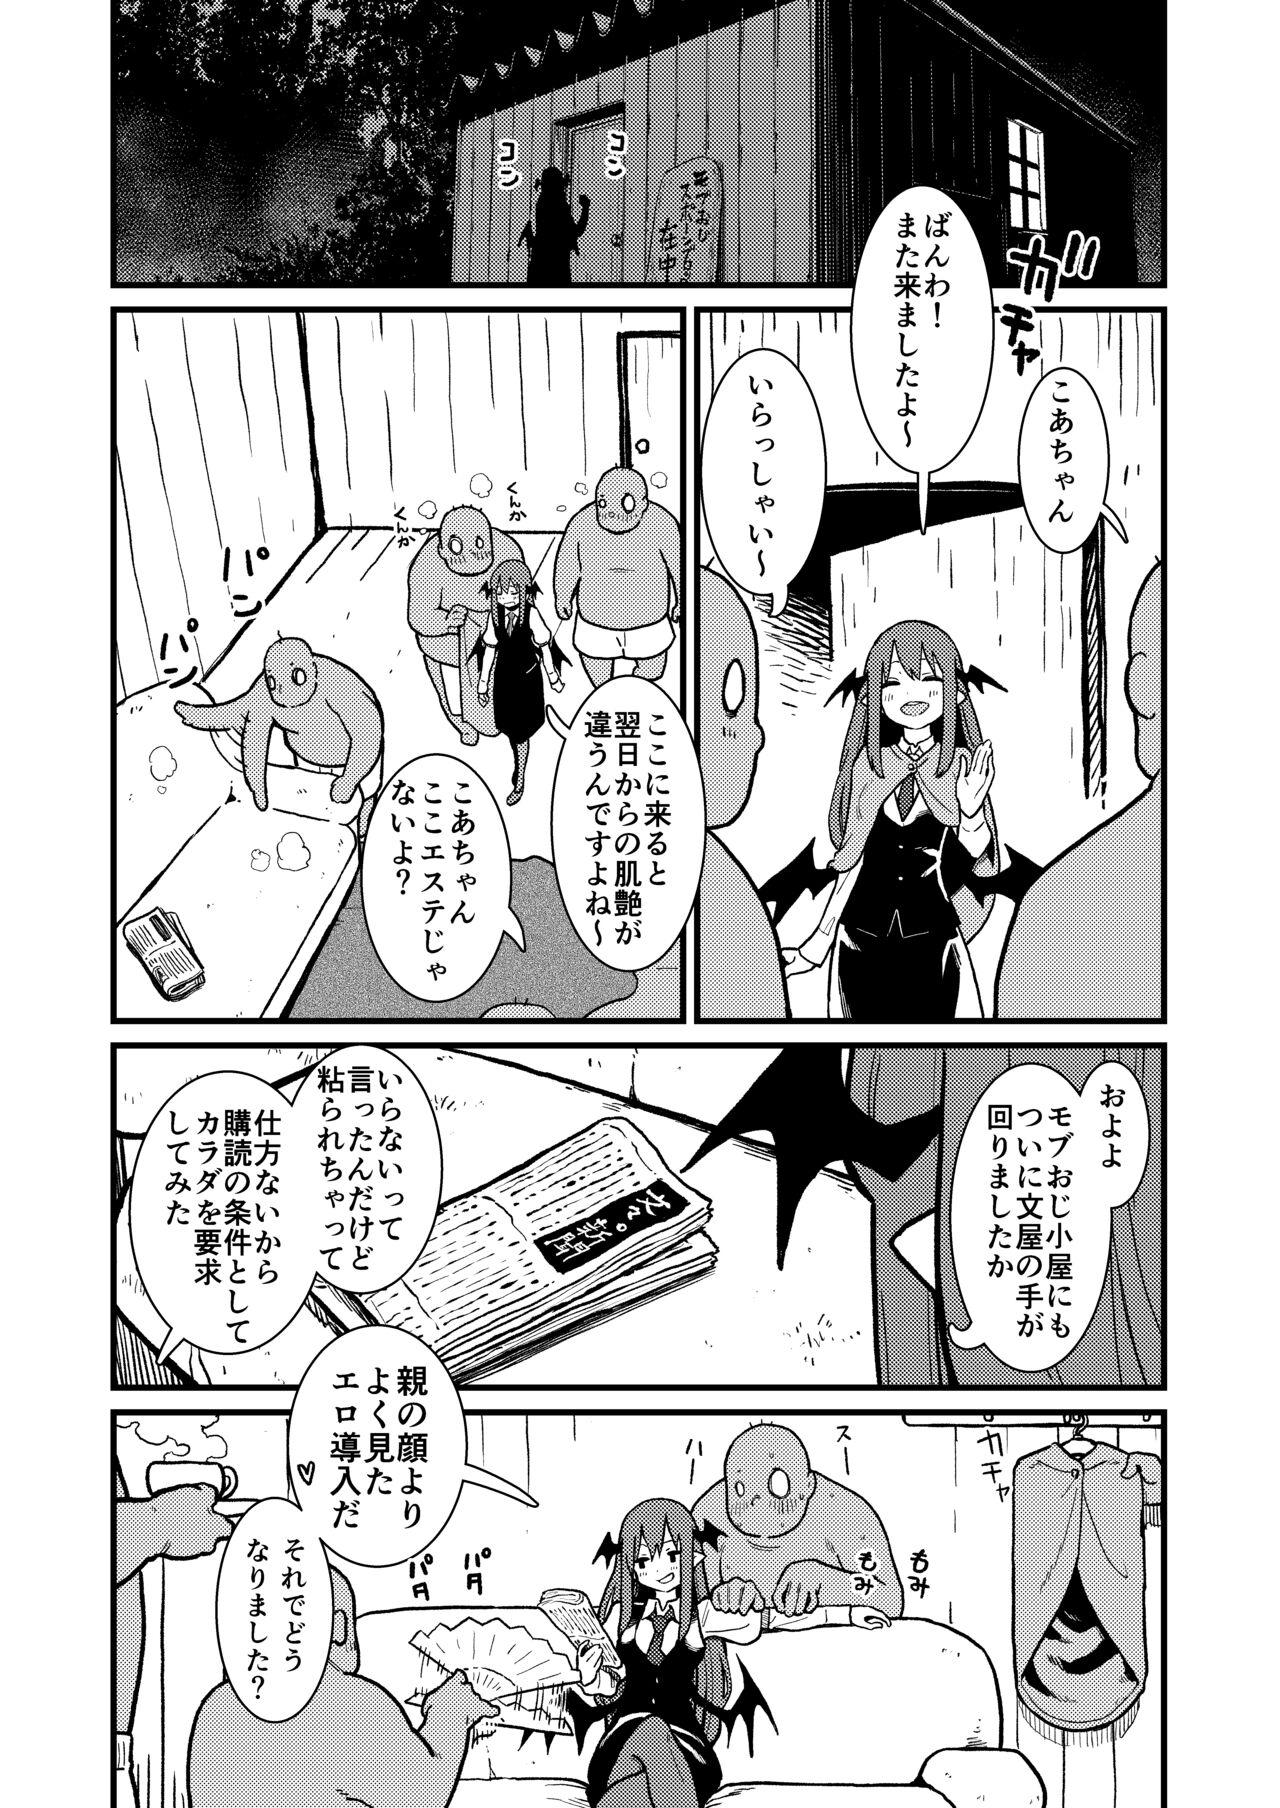 Lolicon Mob Oji ③ R18/Manga/6+omake 1p - Touhou project Cum On Tits - Picture 1